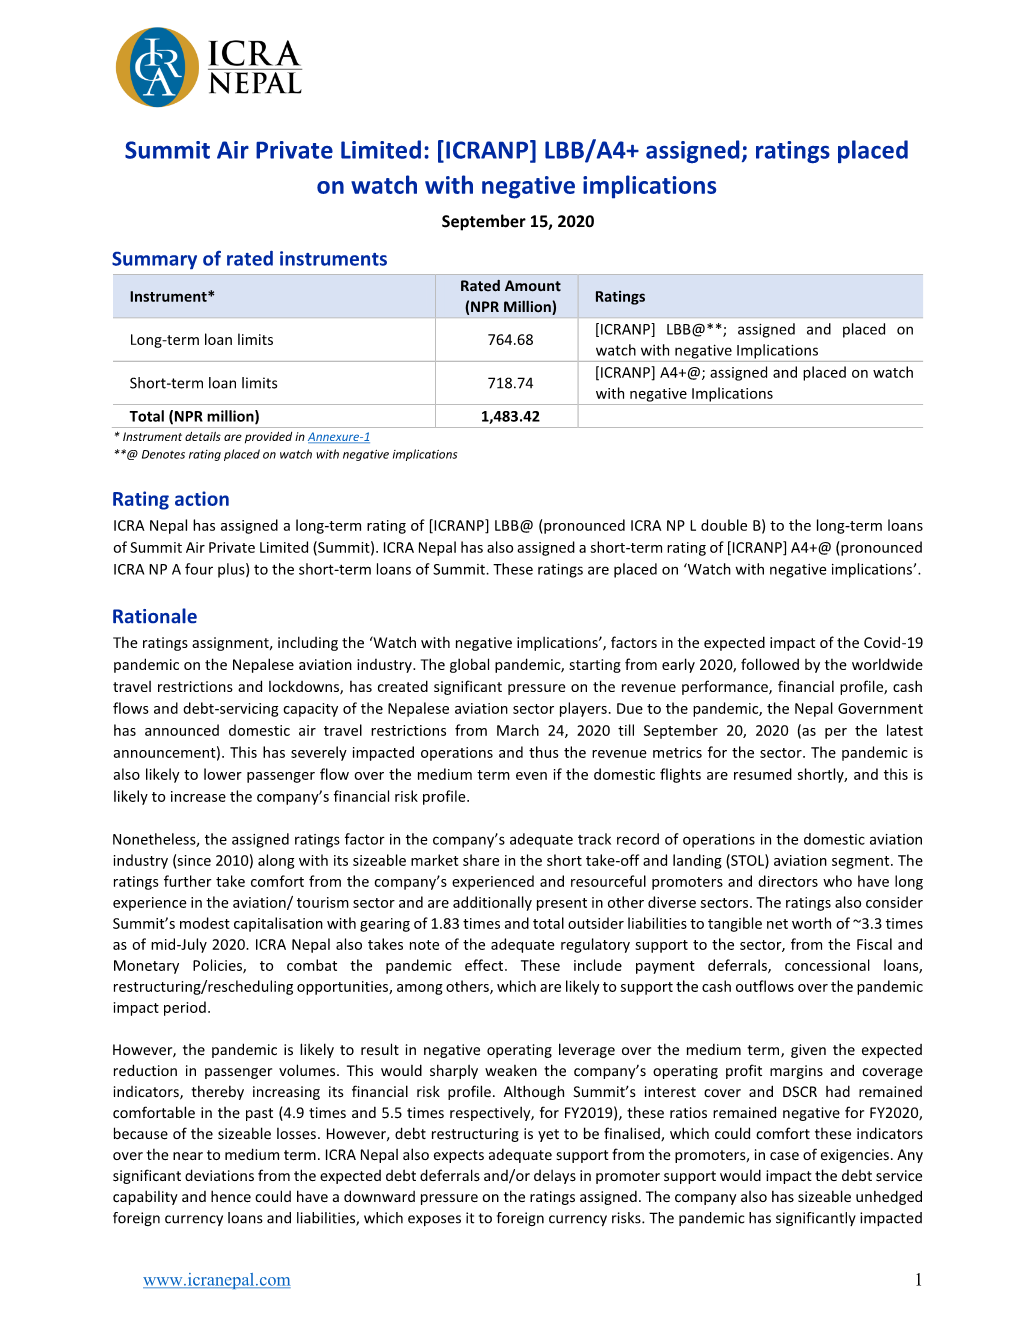 Summit Air Private Limited: [ICRANP] LBB/A4+ Assigned; Ratings Placed on Watch with Negative Implications September 15, 2020